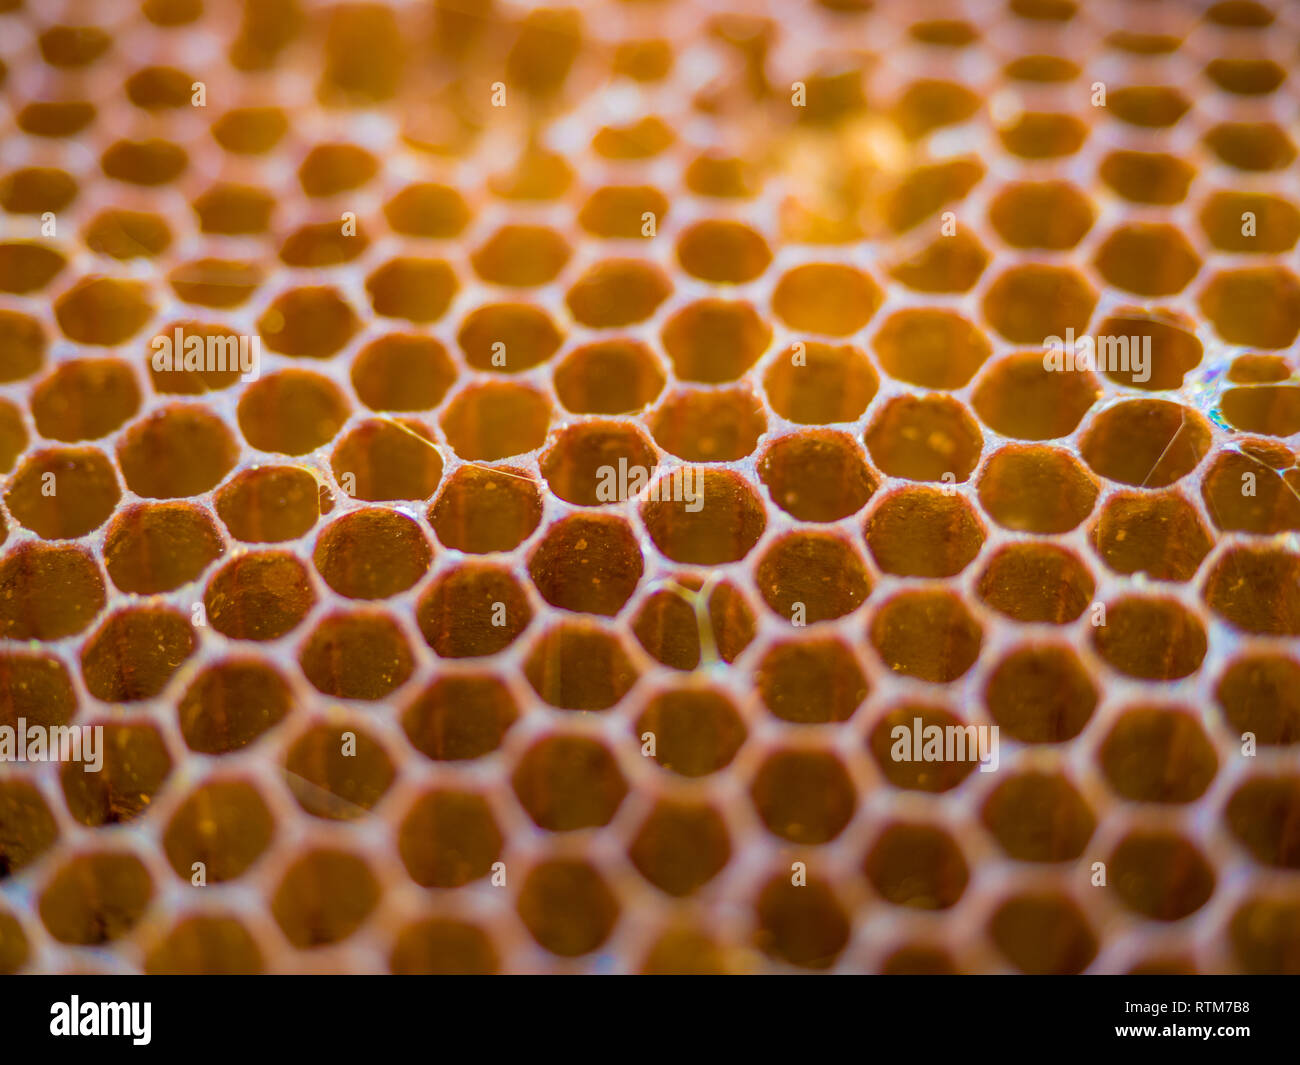 Texture background of bee wax and honey from a hive, organic and healthy food. Stock Photo